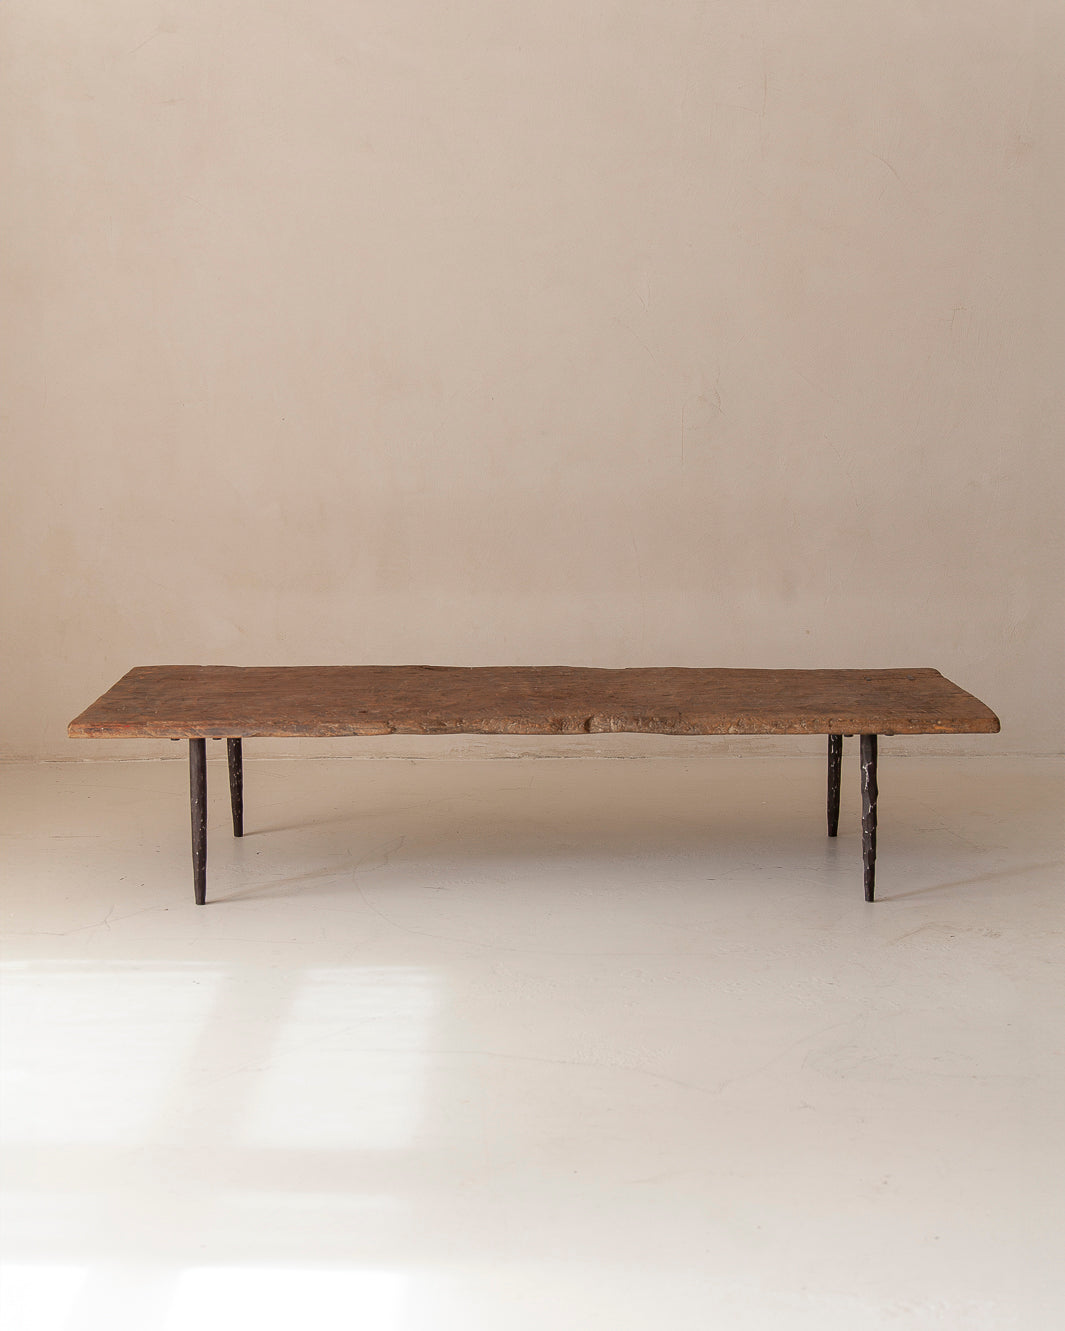 Chinese table from the 30s, 163x60x45cm